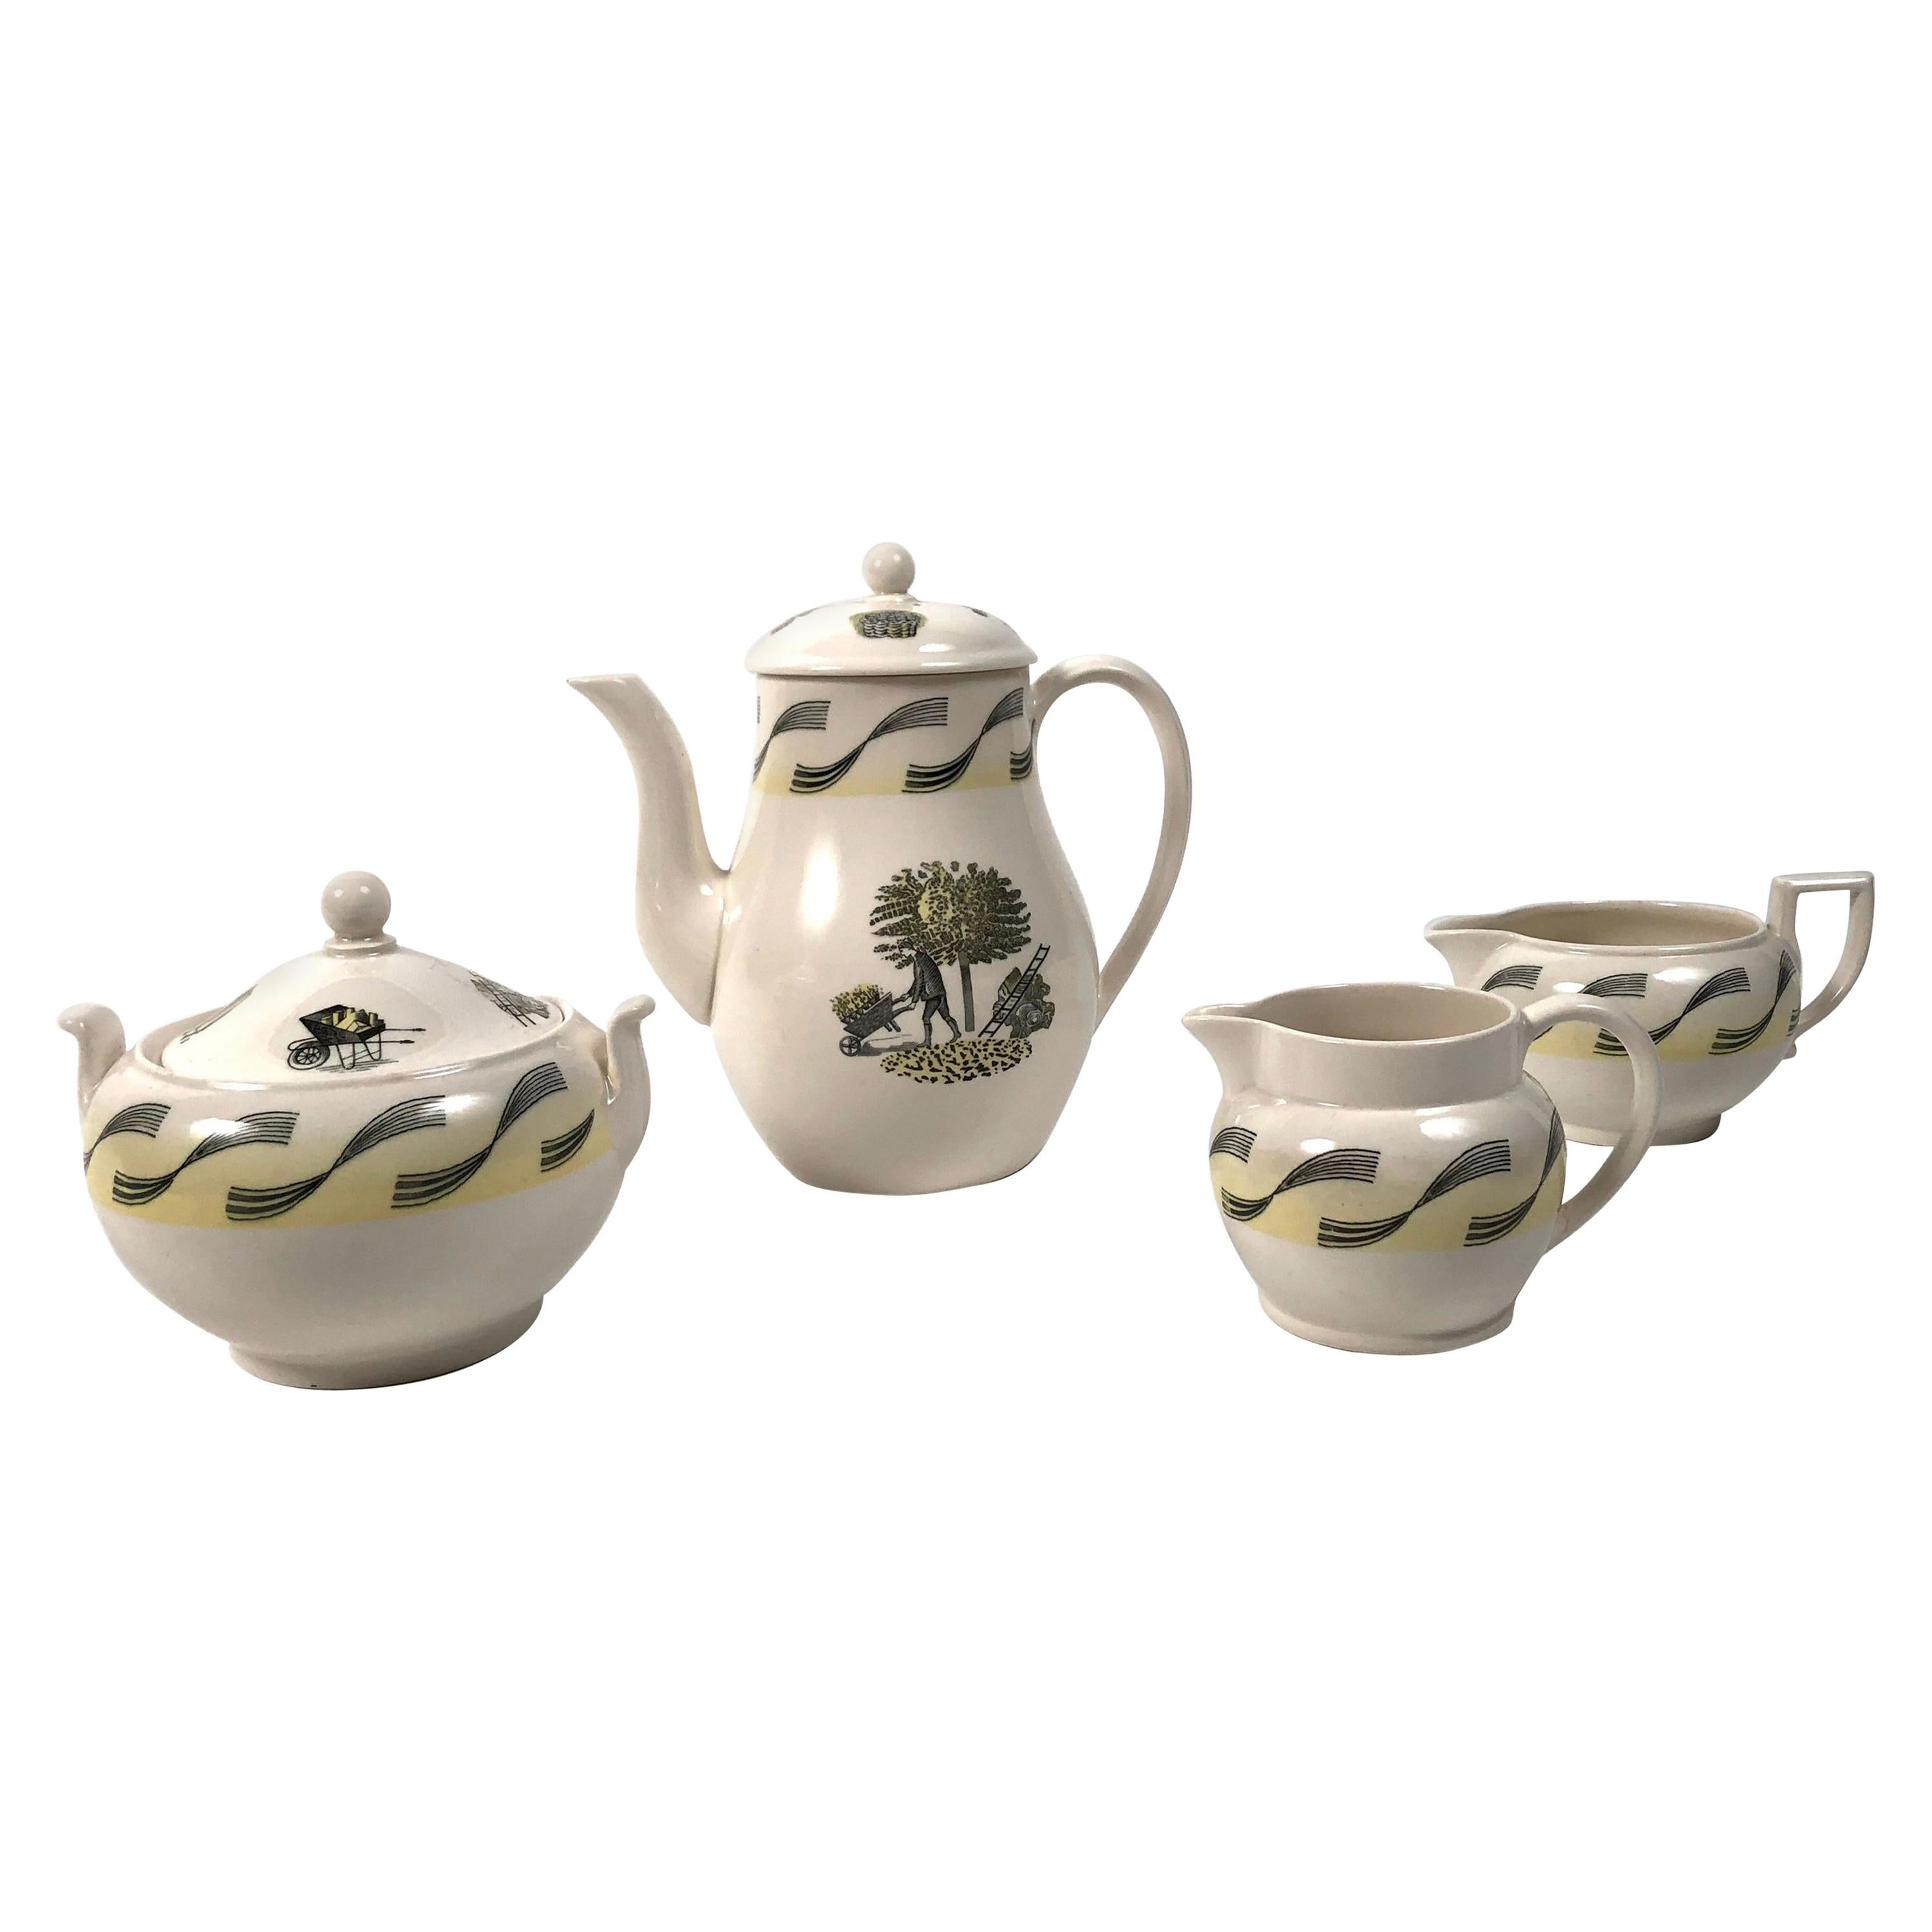 Eric Ravilious Garden Series Coffee Service for Wedgwood